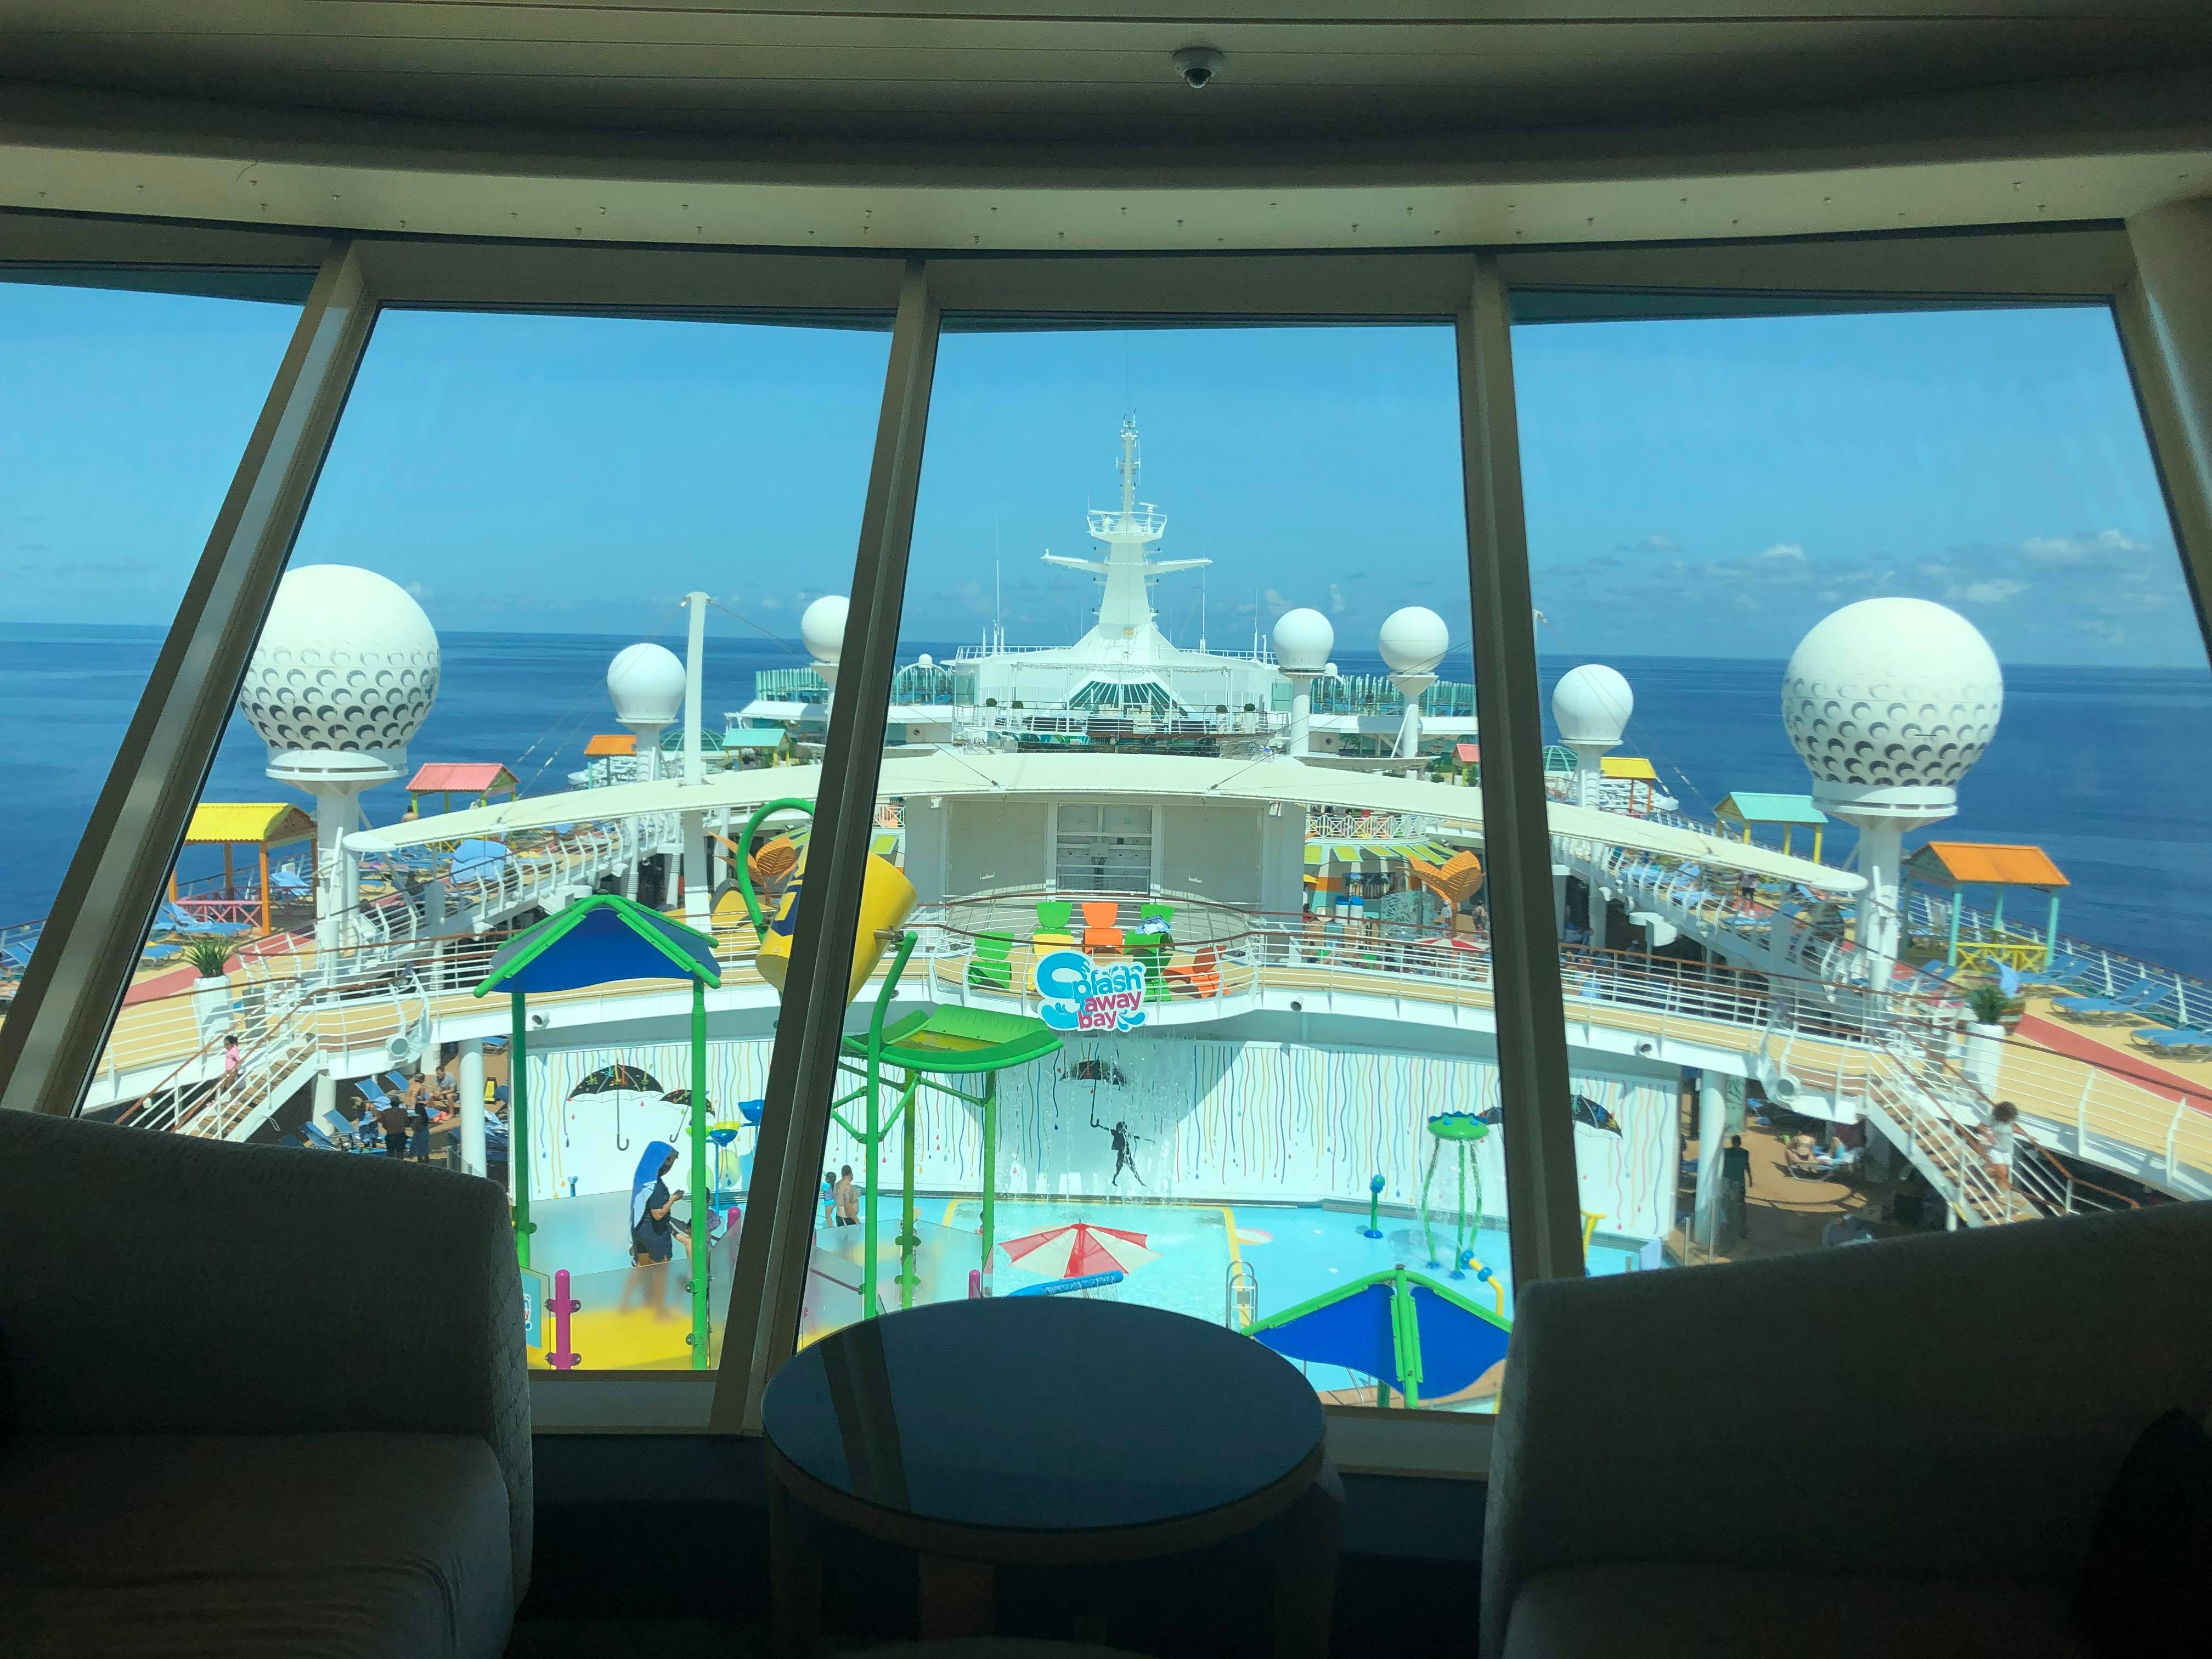 Viking Crowne Lounge on Freedom of the Seas by Royal Caribbean. This is the Best Time to Cruise.